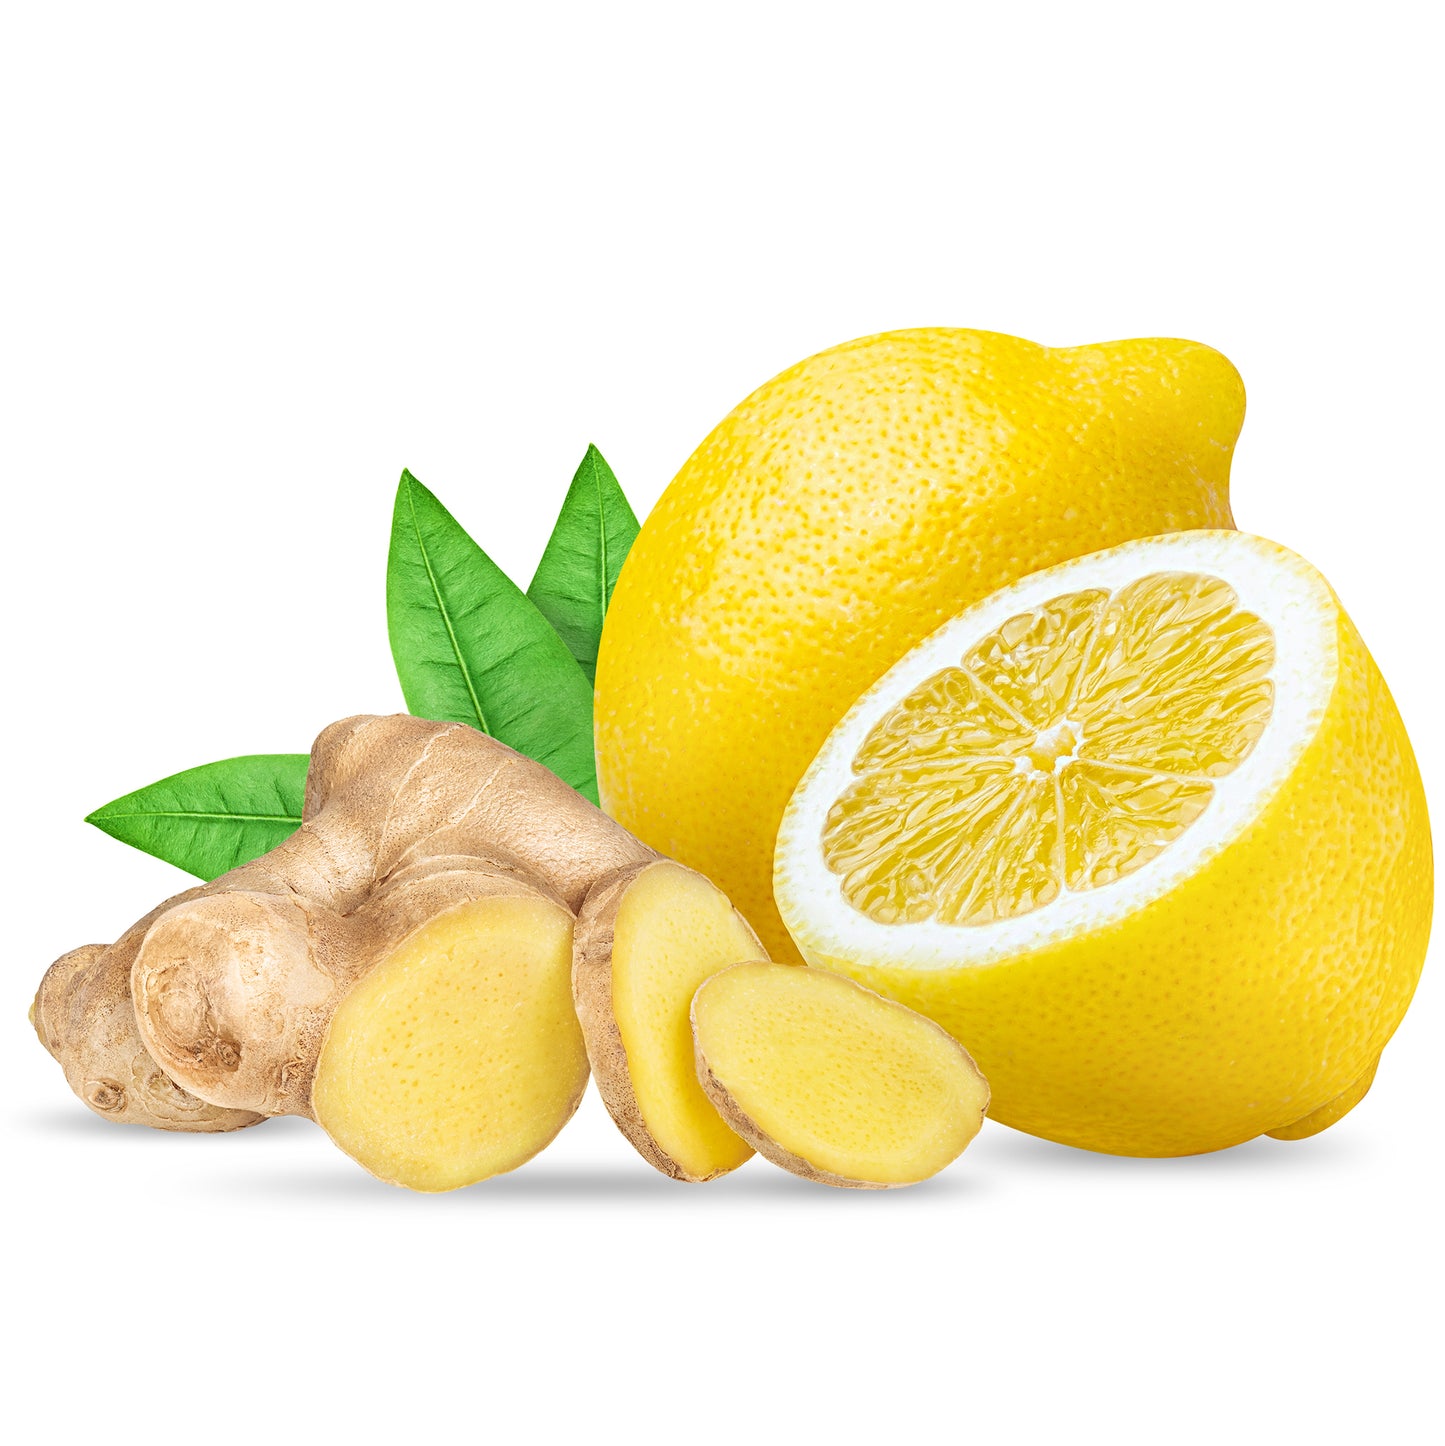 Ginger and Lemon - Yankee Candle Type Fragrance Oil